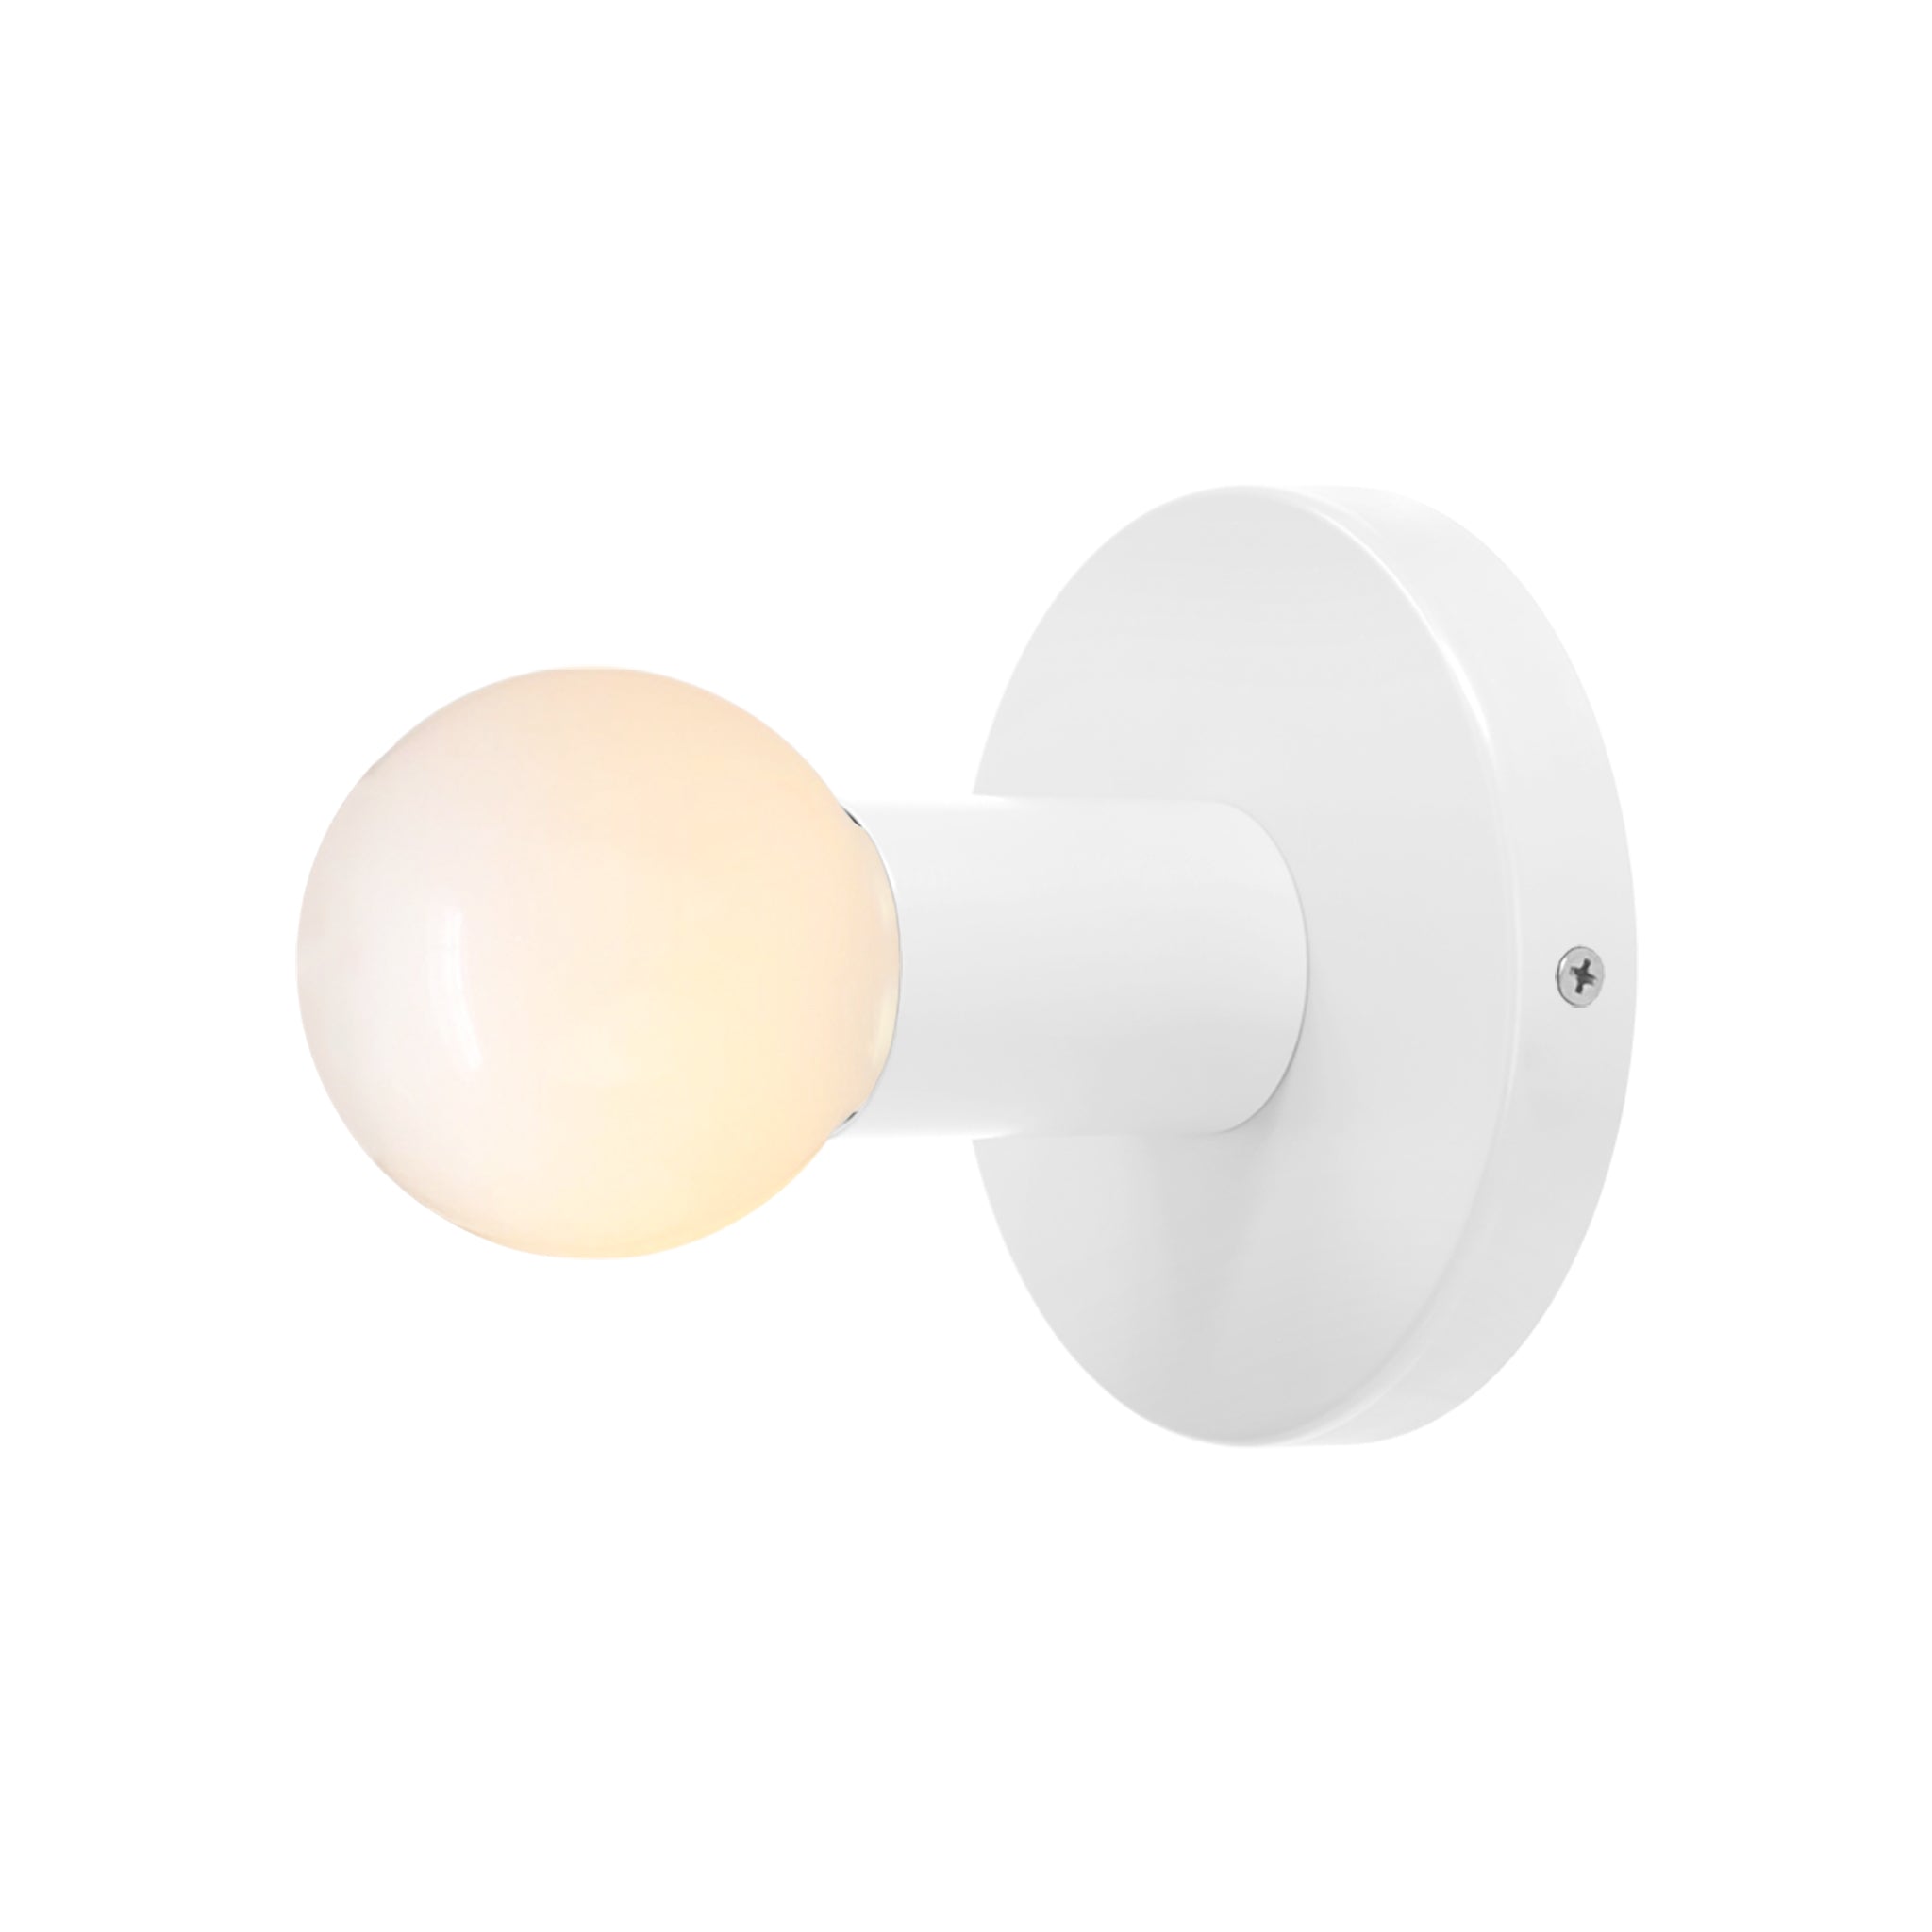 Nickel and white color Twink sconce Dutton Brown lighting